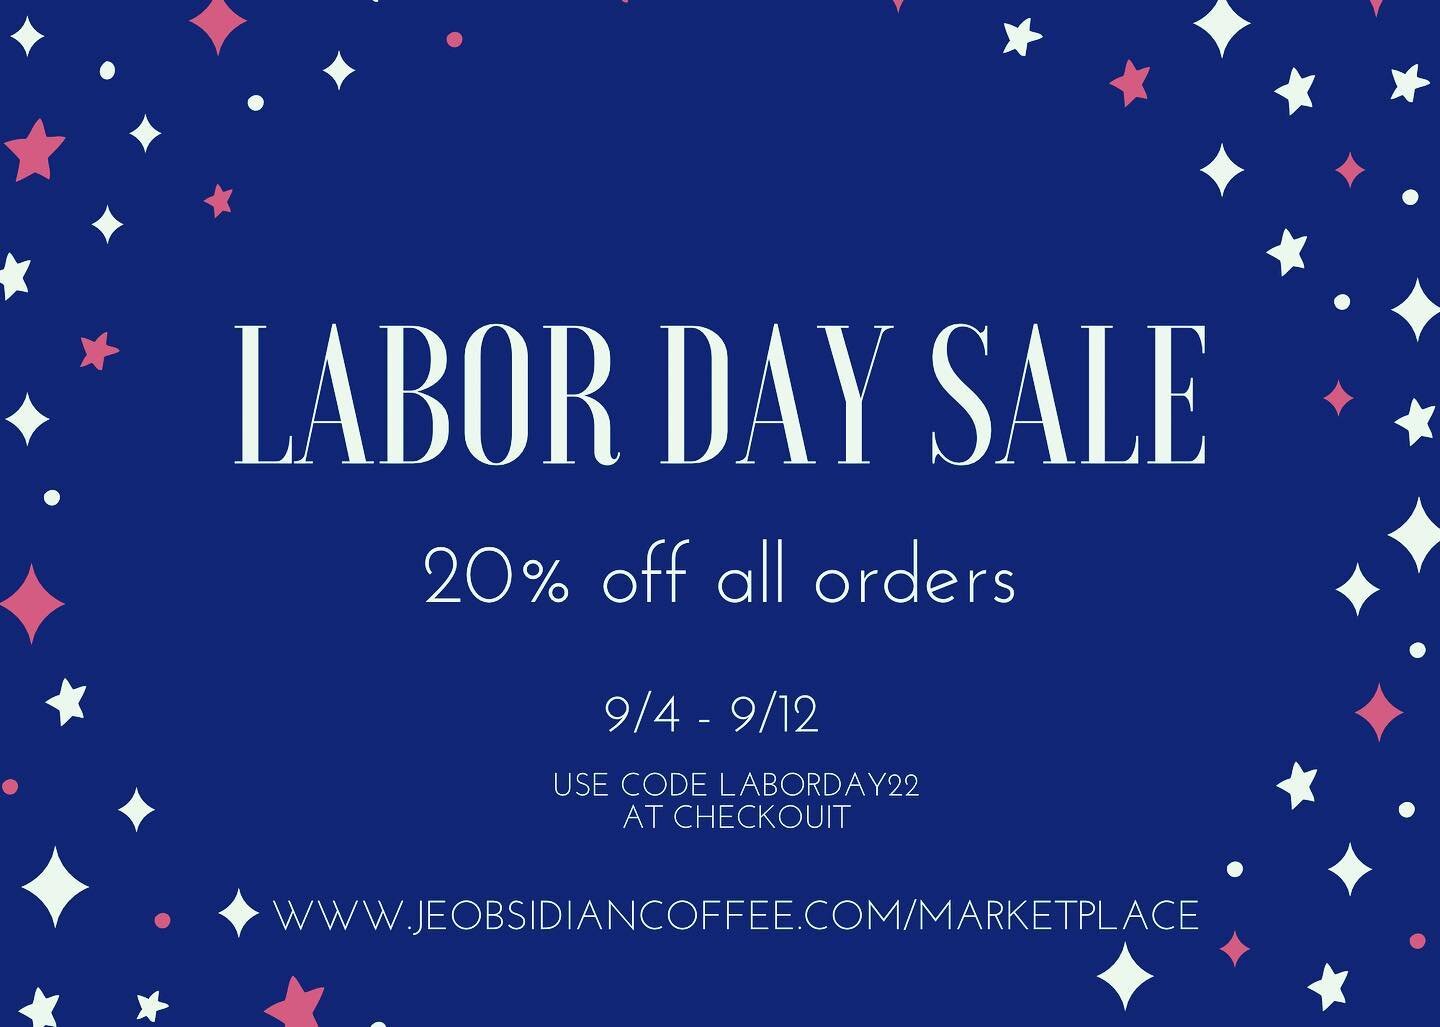 Happy Labor Day Sale! 🌟

Enjoy 20% off all orders placed today, September 4th through September 12th on our website at www.jeobsidiancoffee.com/marketplace and use the code LABORDAY22 at checkout. Free delivery on local orders. 

#belmontnc #belmont